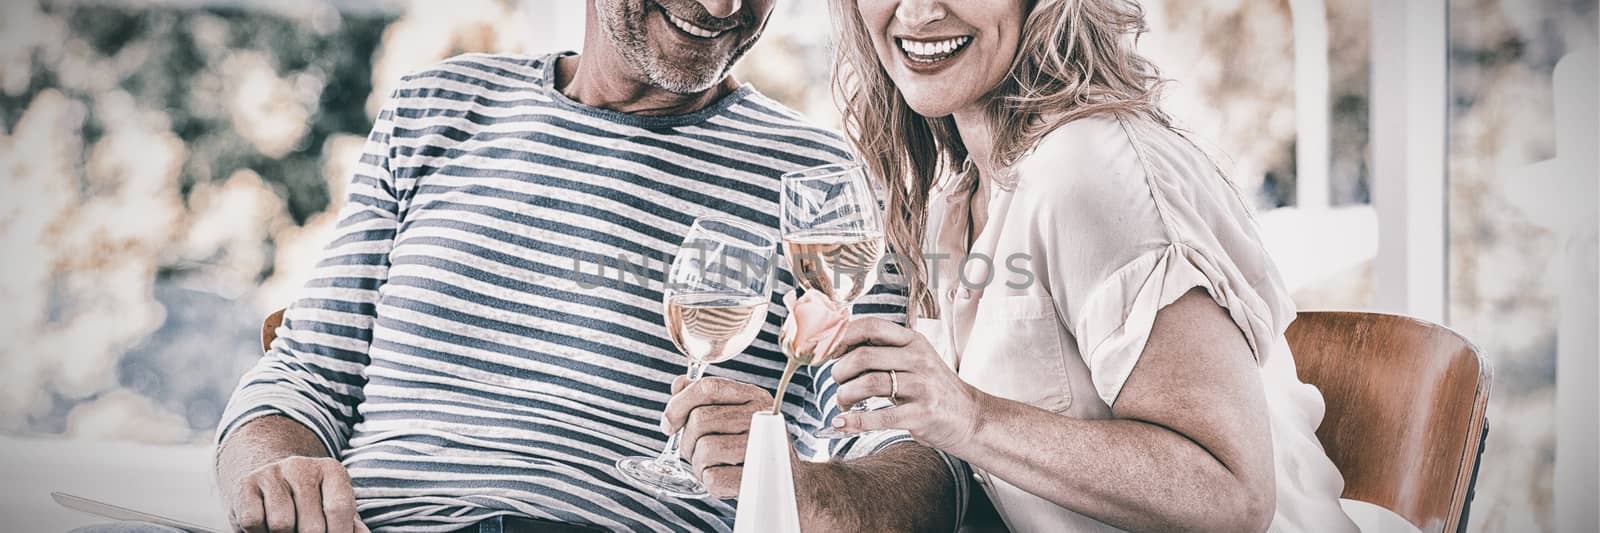 Portrait of smiling mature couple holding wine glasses at restaurant